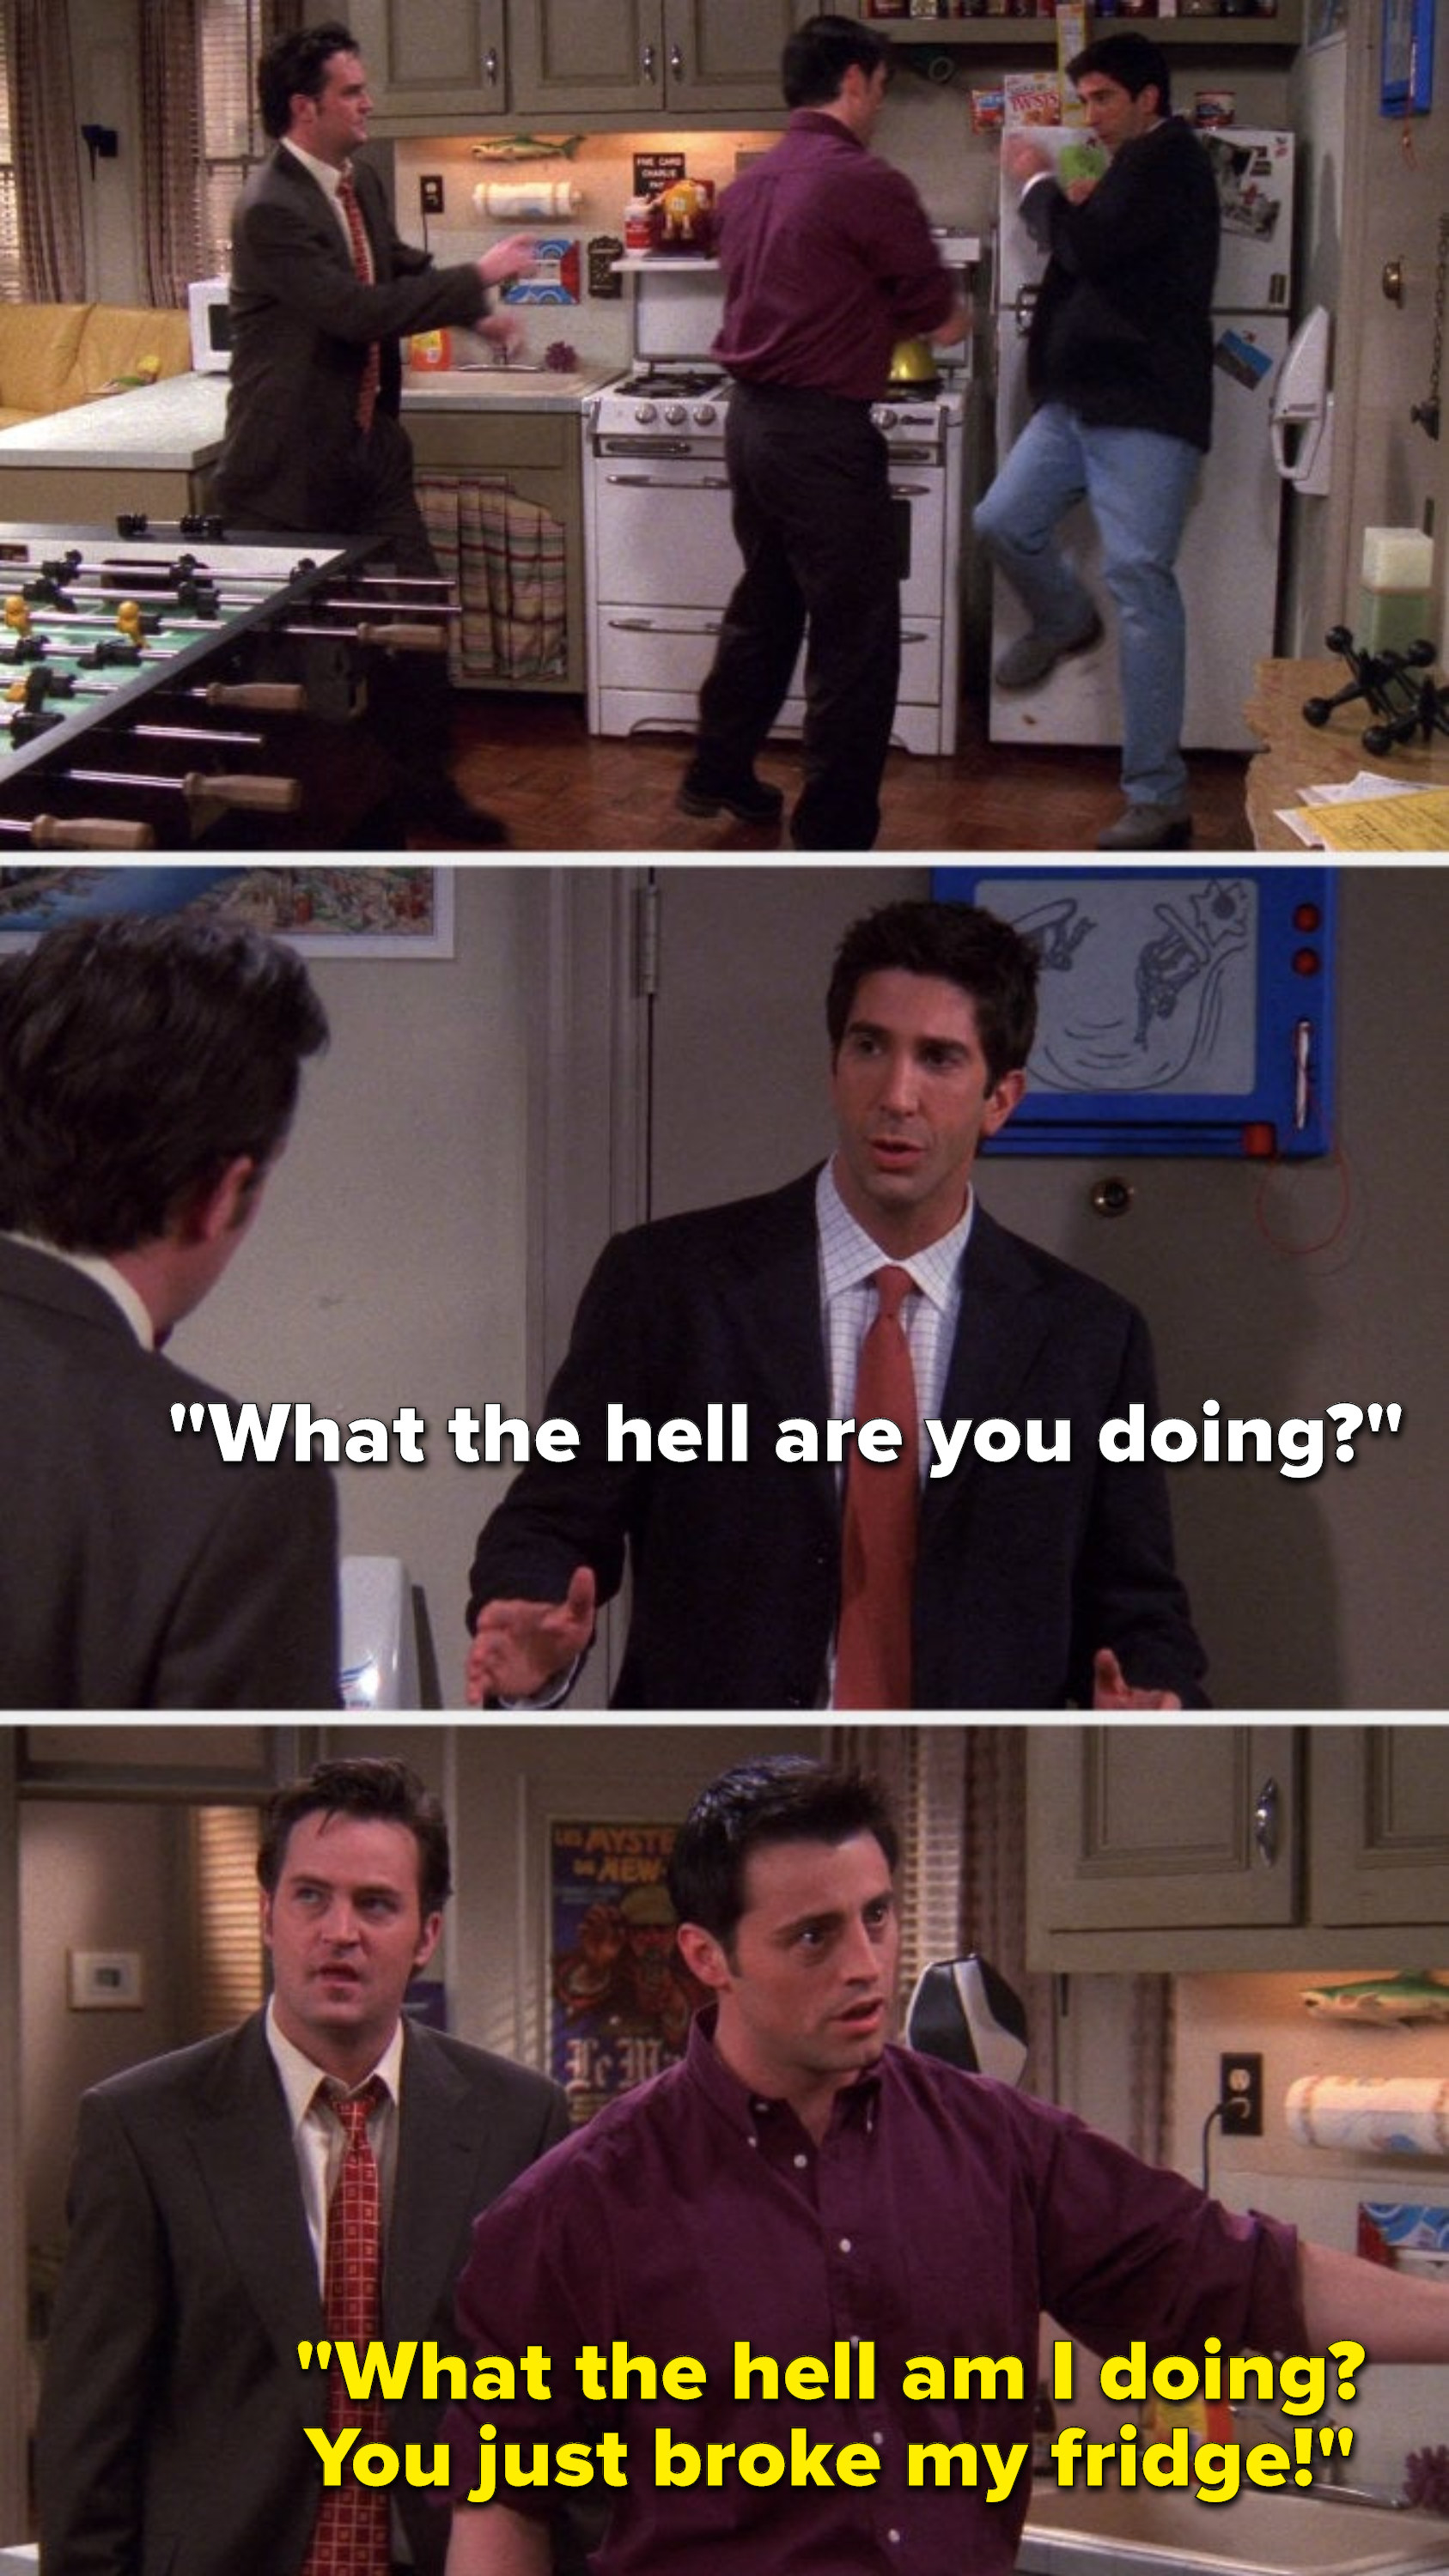 Joey pushes Ross into the fridge, Ross says, &quot;What the hell are you doing,&quot; and Joey says, &quot;What the hell am I doing, you just broke my fridge&quot;